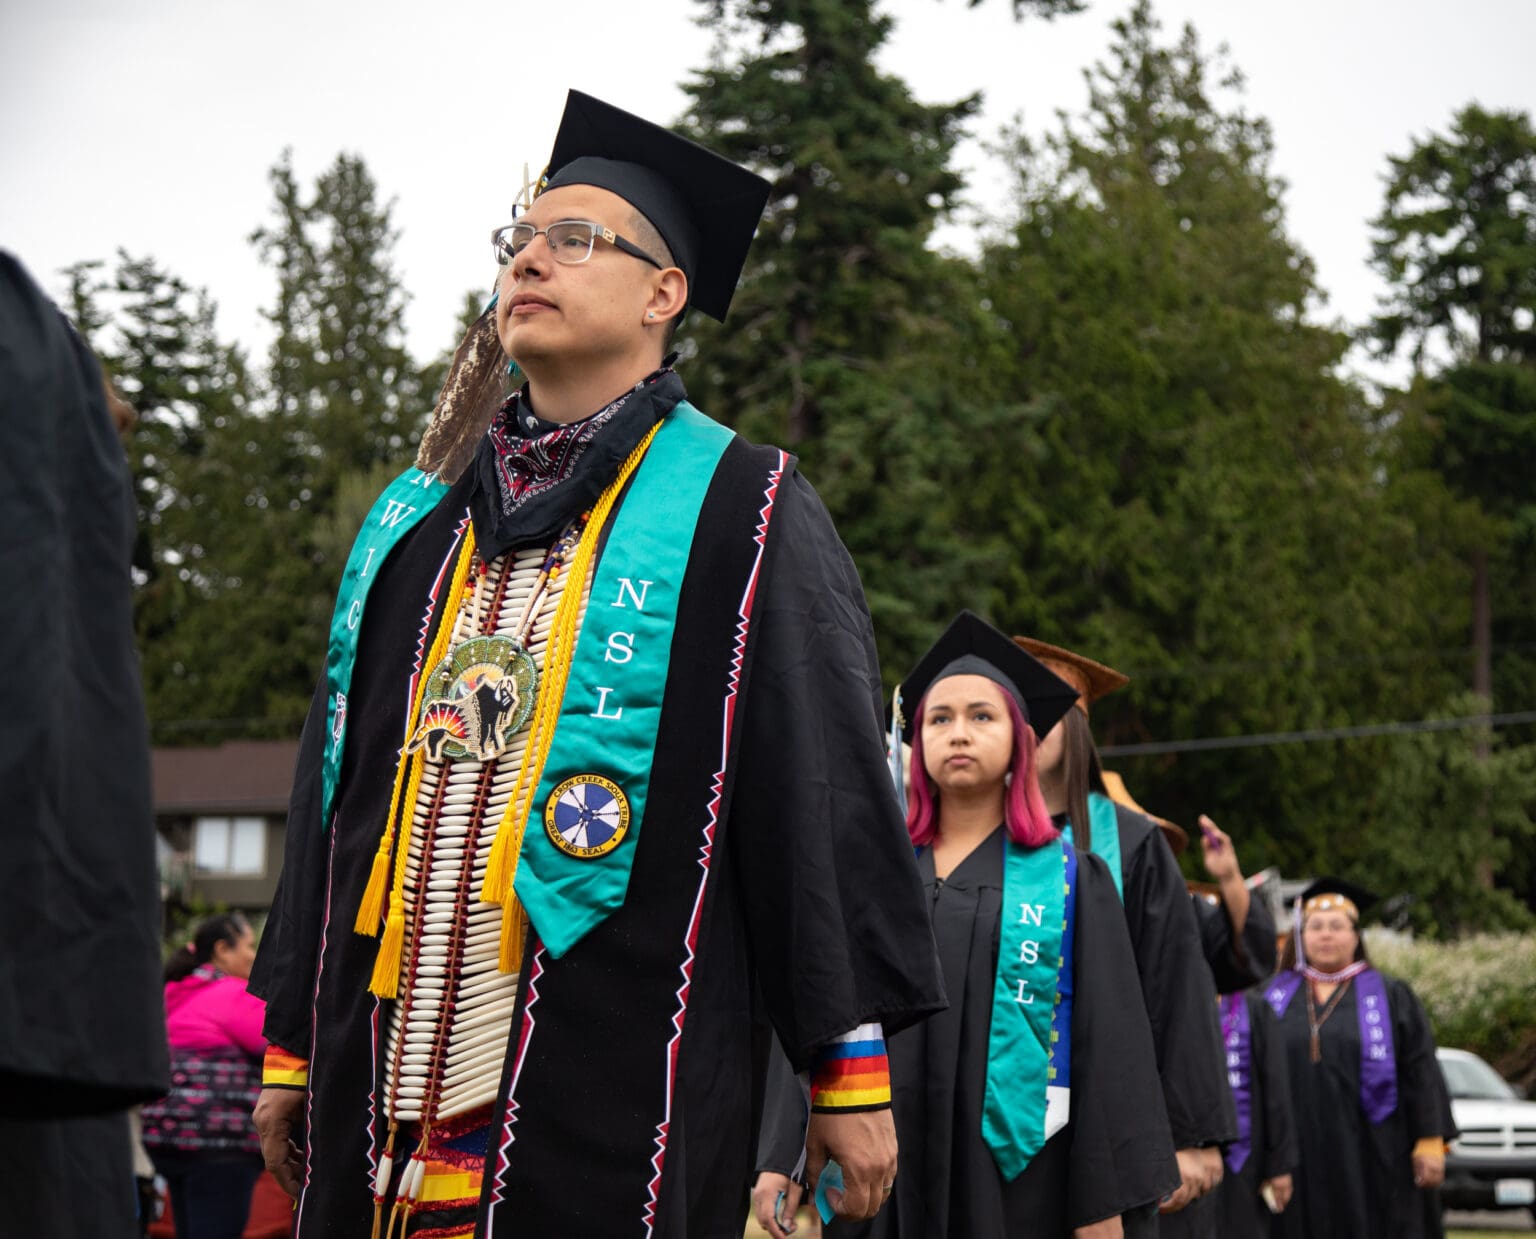 Jared Gorman-Etl of the Crow Creek Sioux Tribe walks June 16 into the Northwest Indian College commencement. Gorman-Etl graduated with a Bachelor of Arts in Native Studies Leadership.